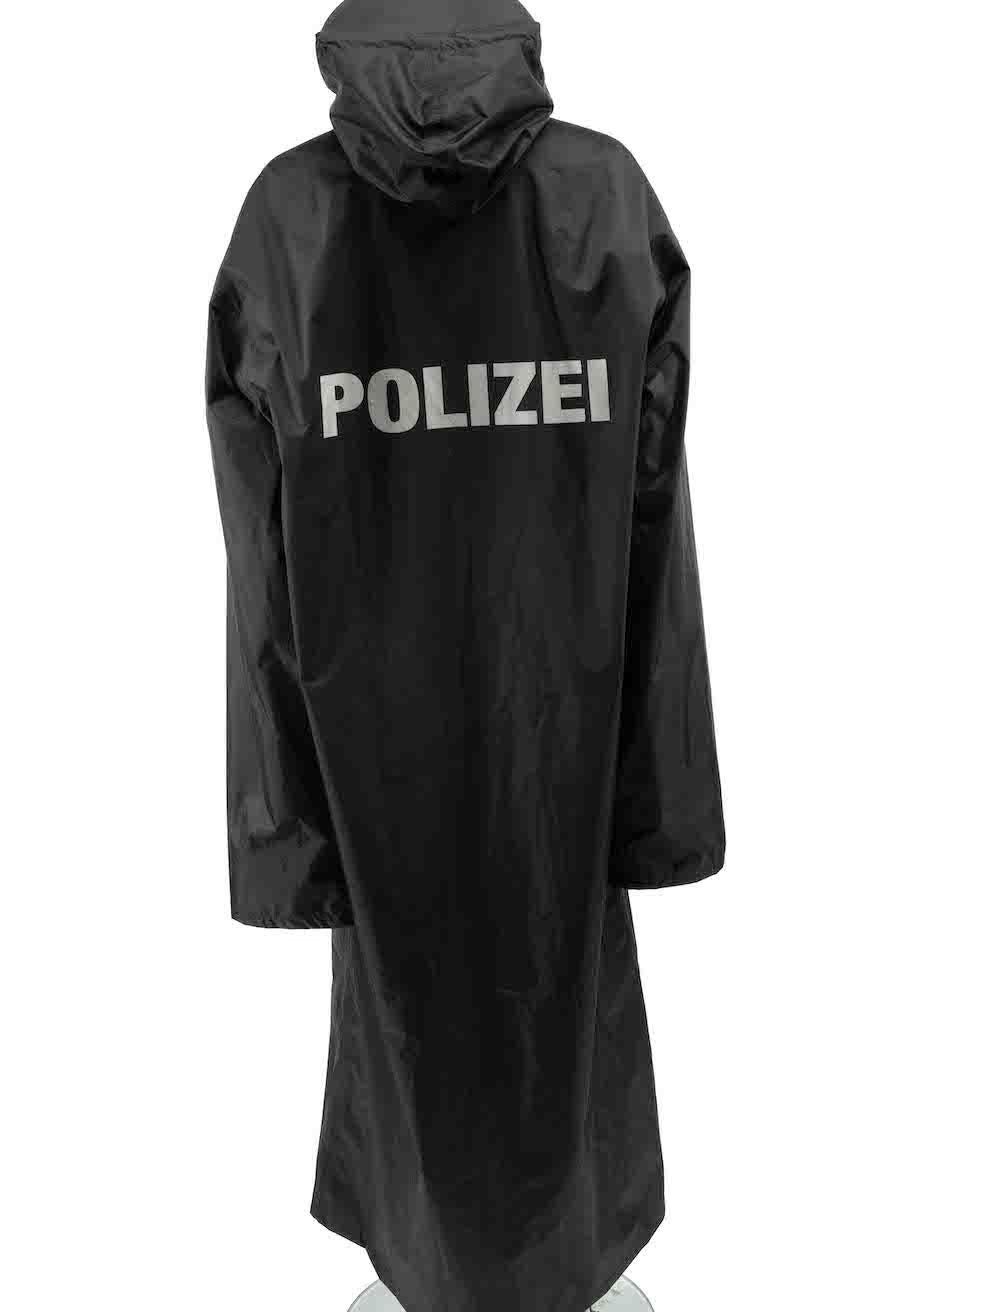 Vetements Black Polizei Oversized Hooded Raincoat Size L In Excellent Condition For Sale In London, GB